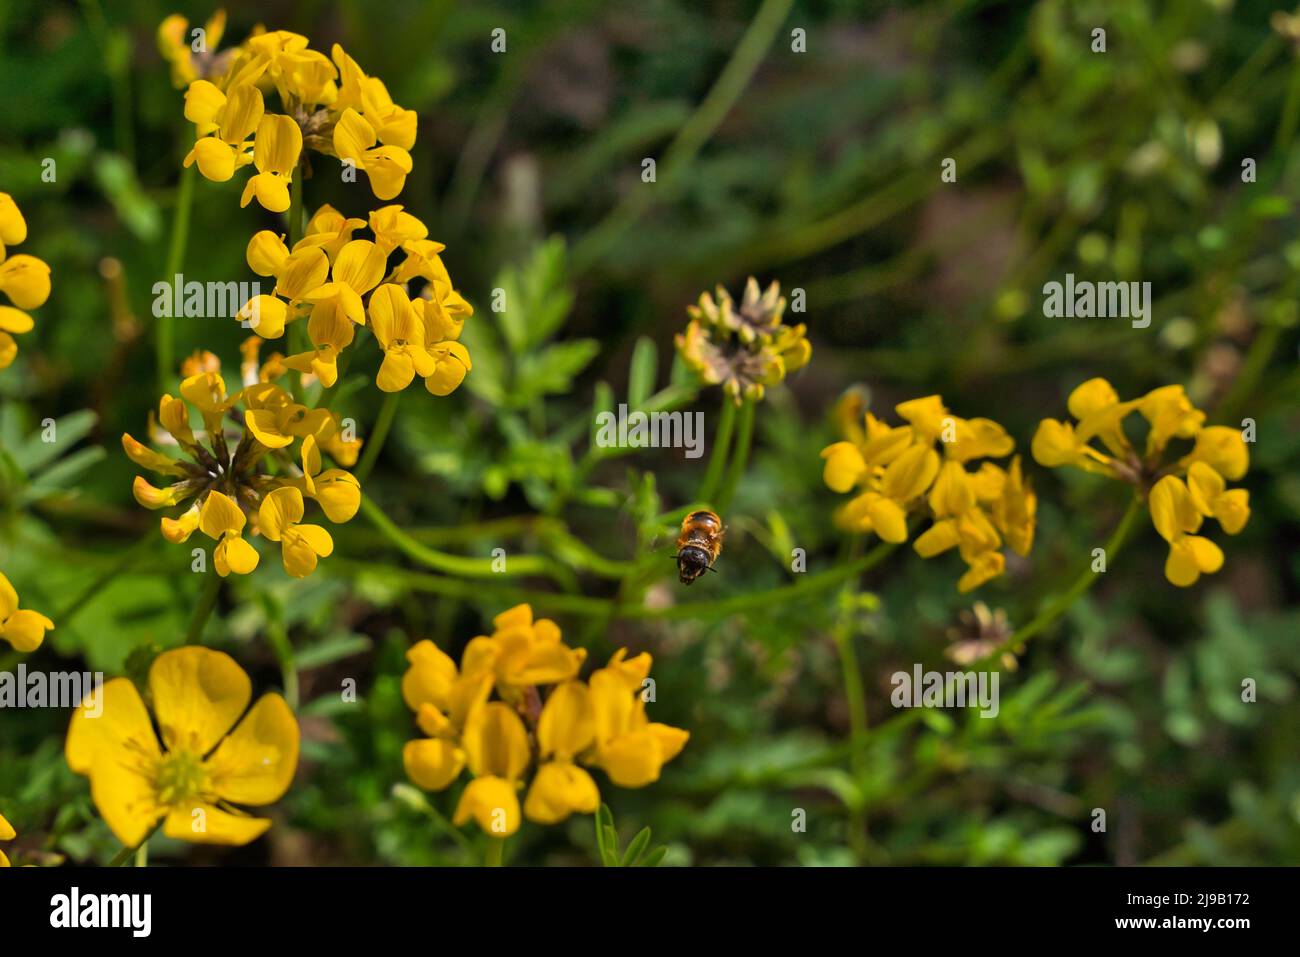 Yellow flowers of common bird's-foot trefoil, Lotus corniculatus, pea family Fabaceae and the wool carder bee Anthidium punctatum, flying bee in germa Stock Photo